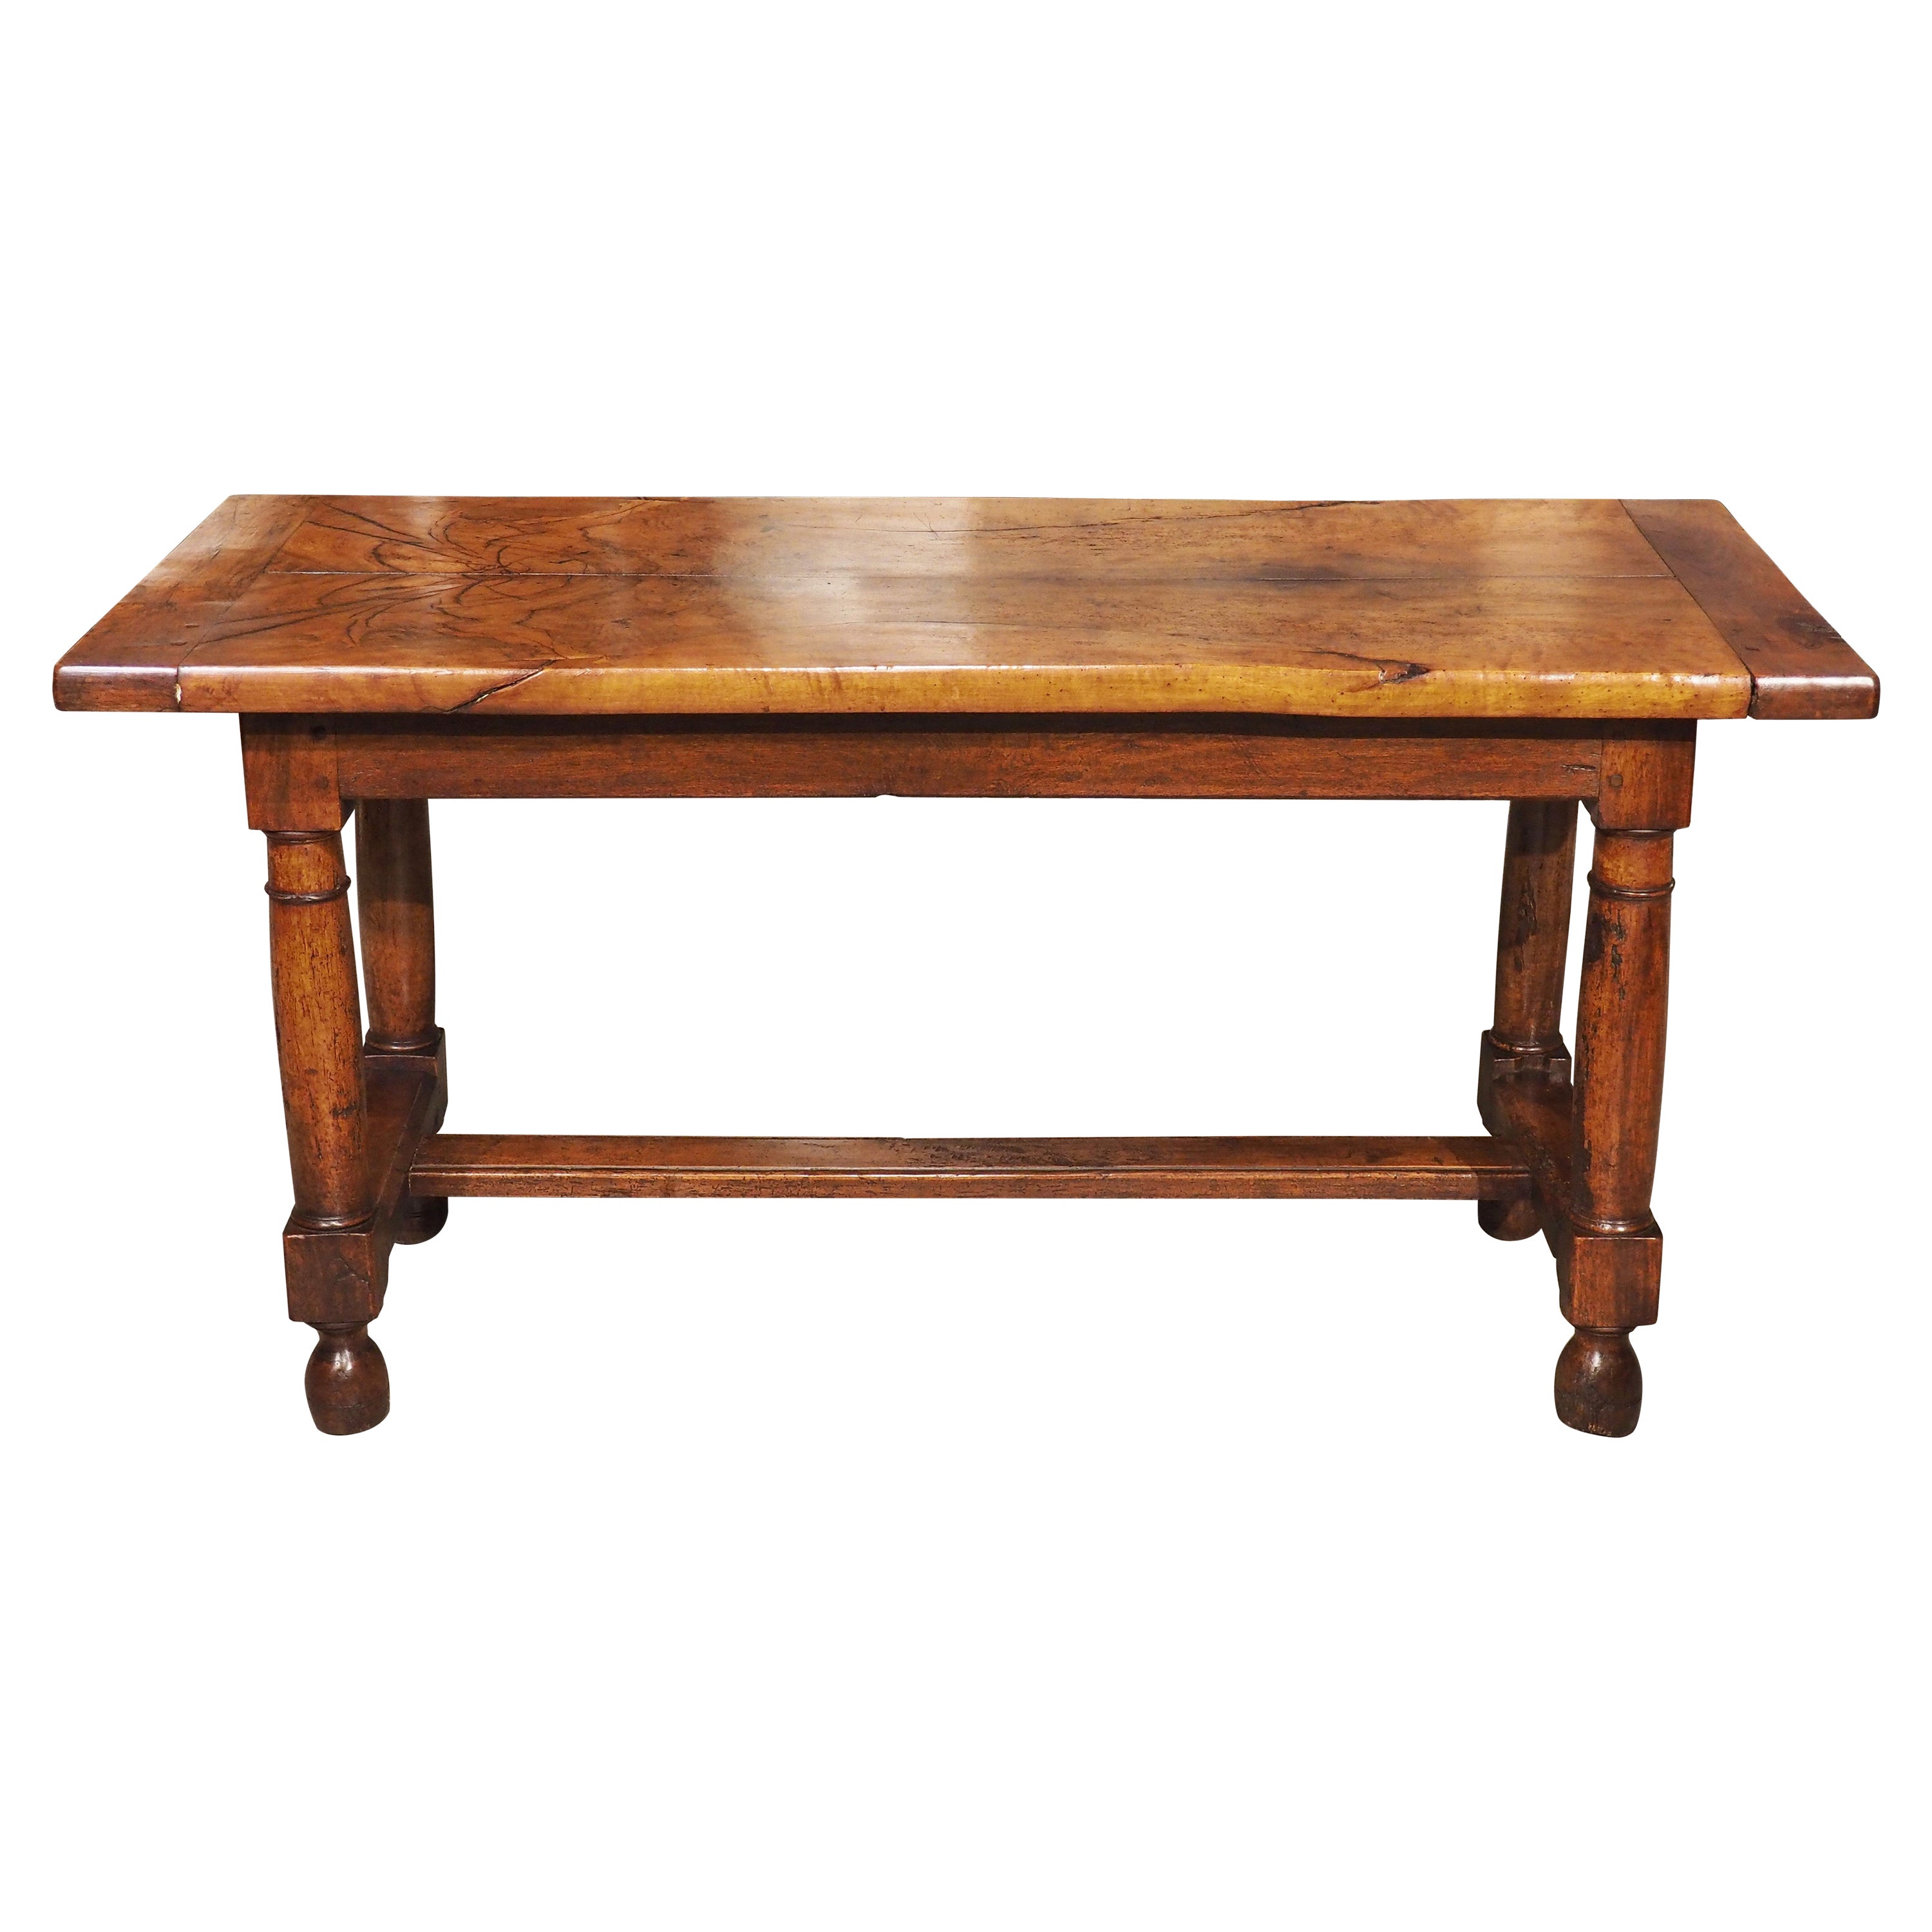 19th Century Single Burl Walnut Plank Table from Normandy, France